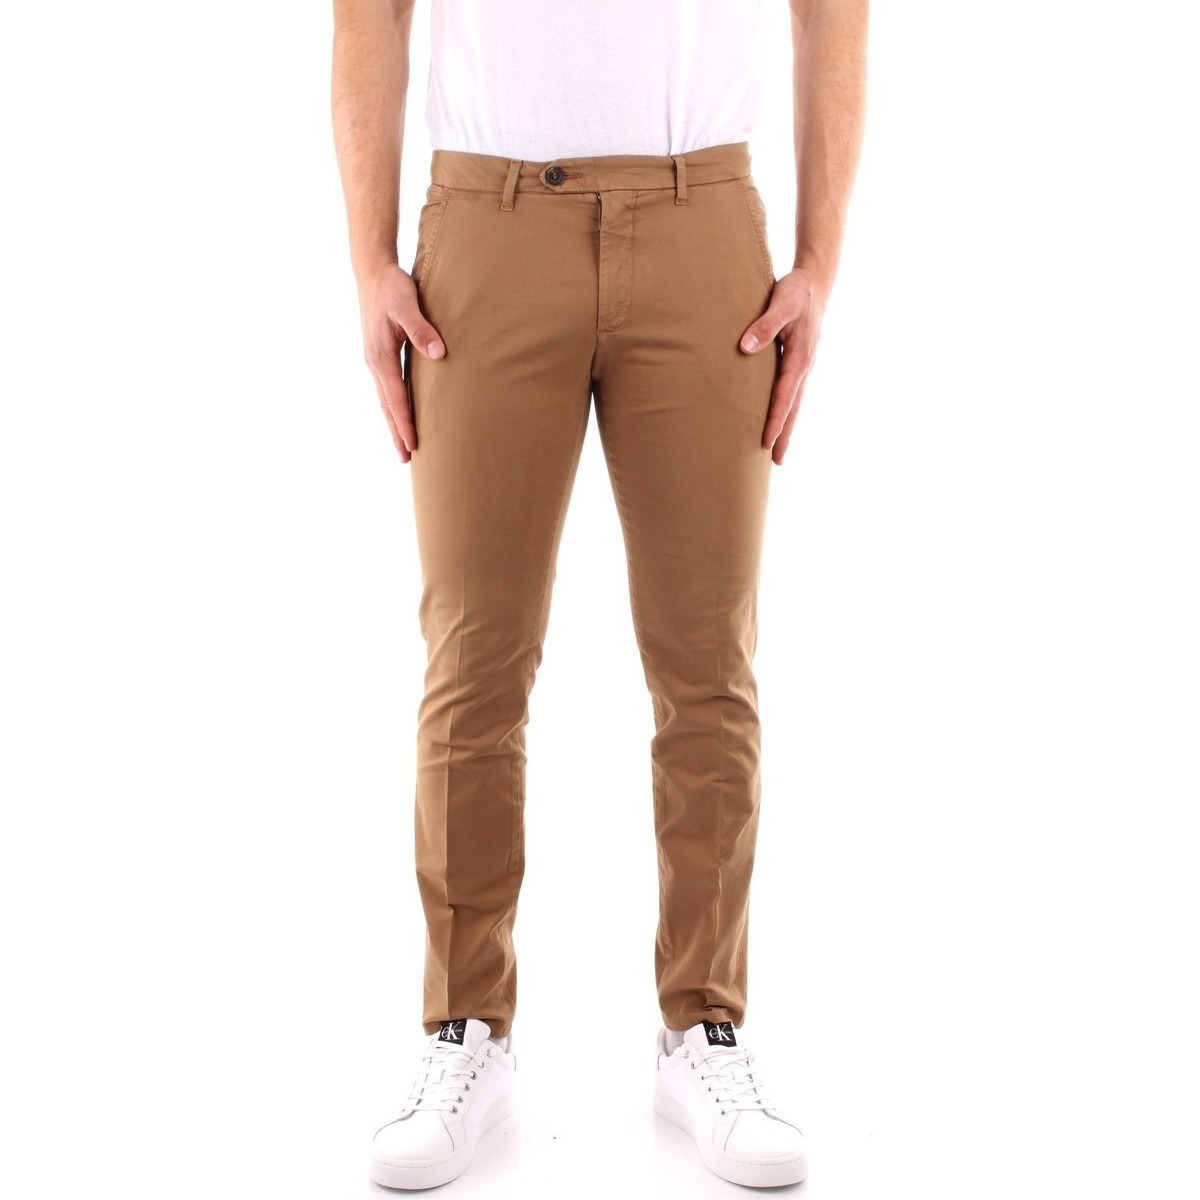 Roy Rogers - Chino Pants in Beige - Spartoo GOOFASH